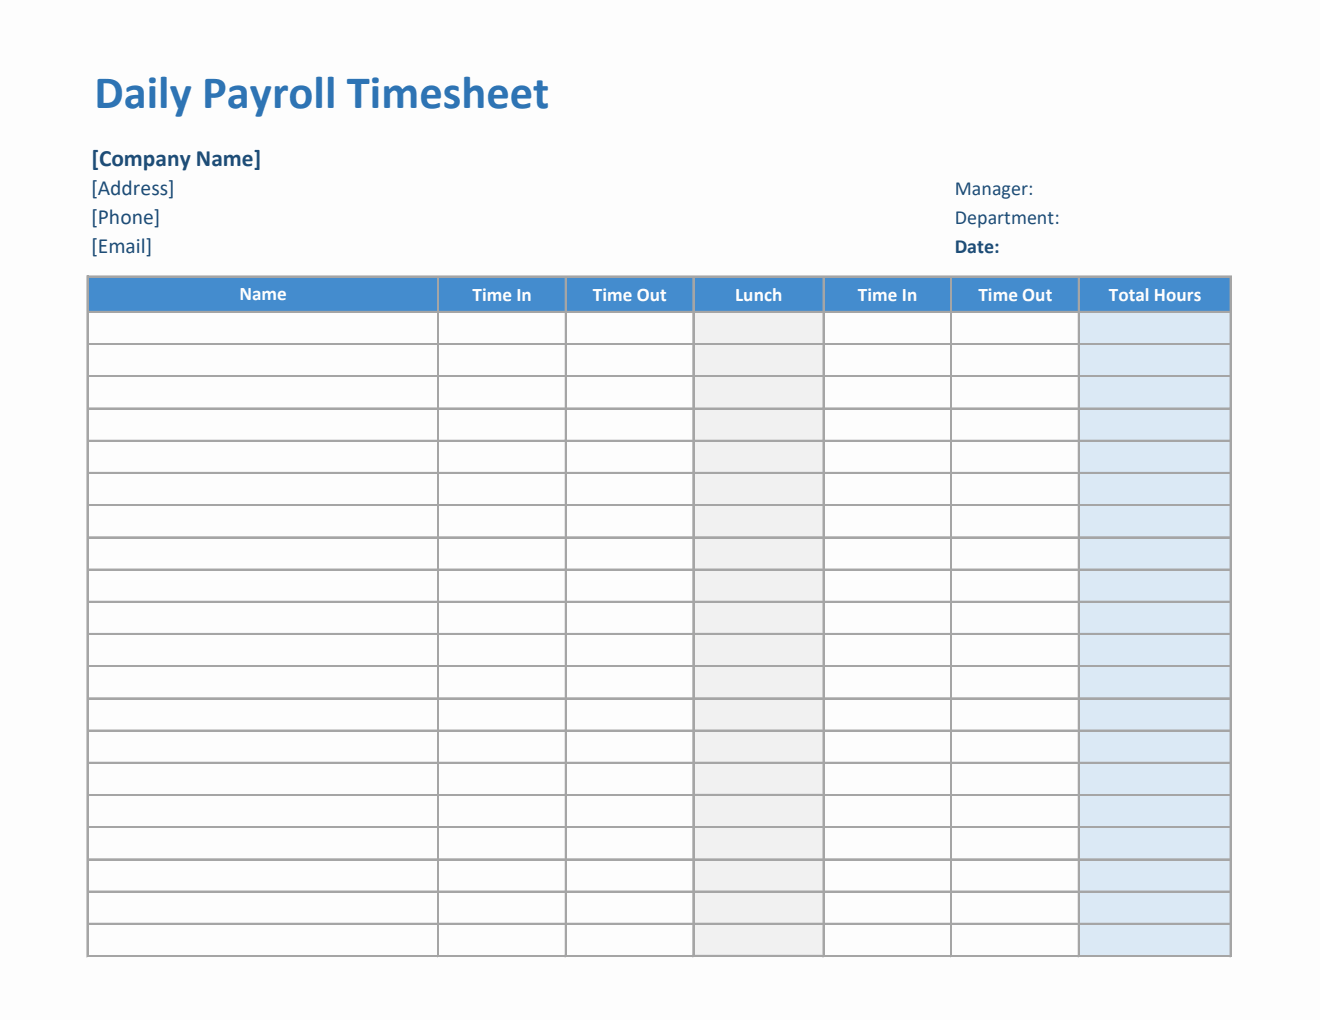 daily-payroll-timesheet-in-excel